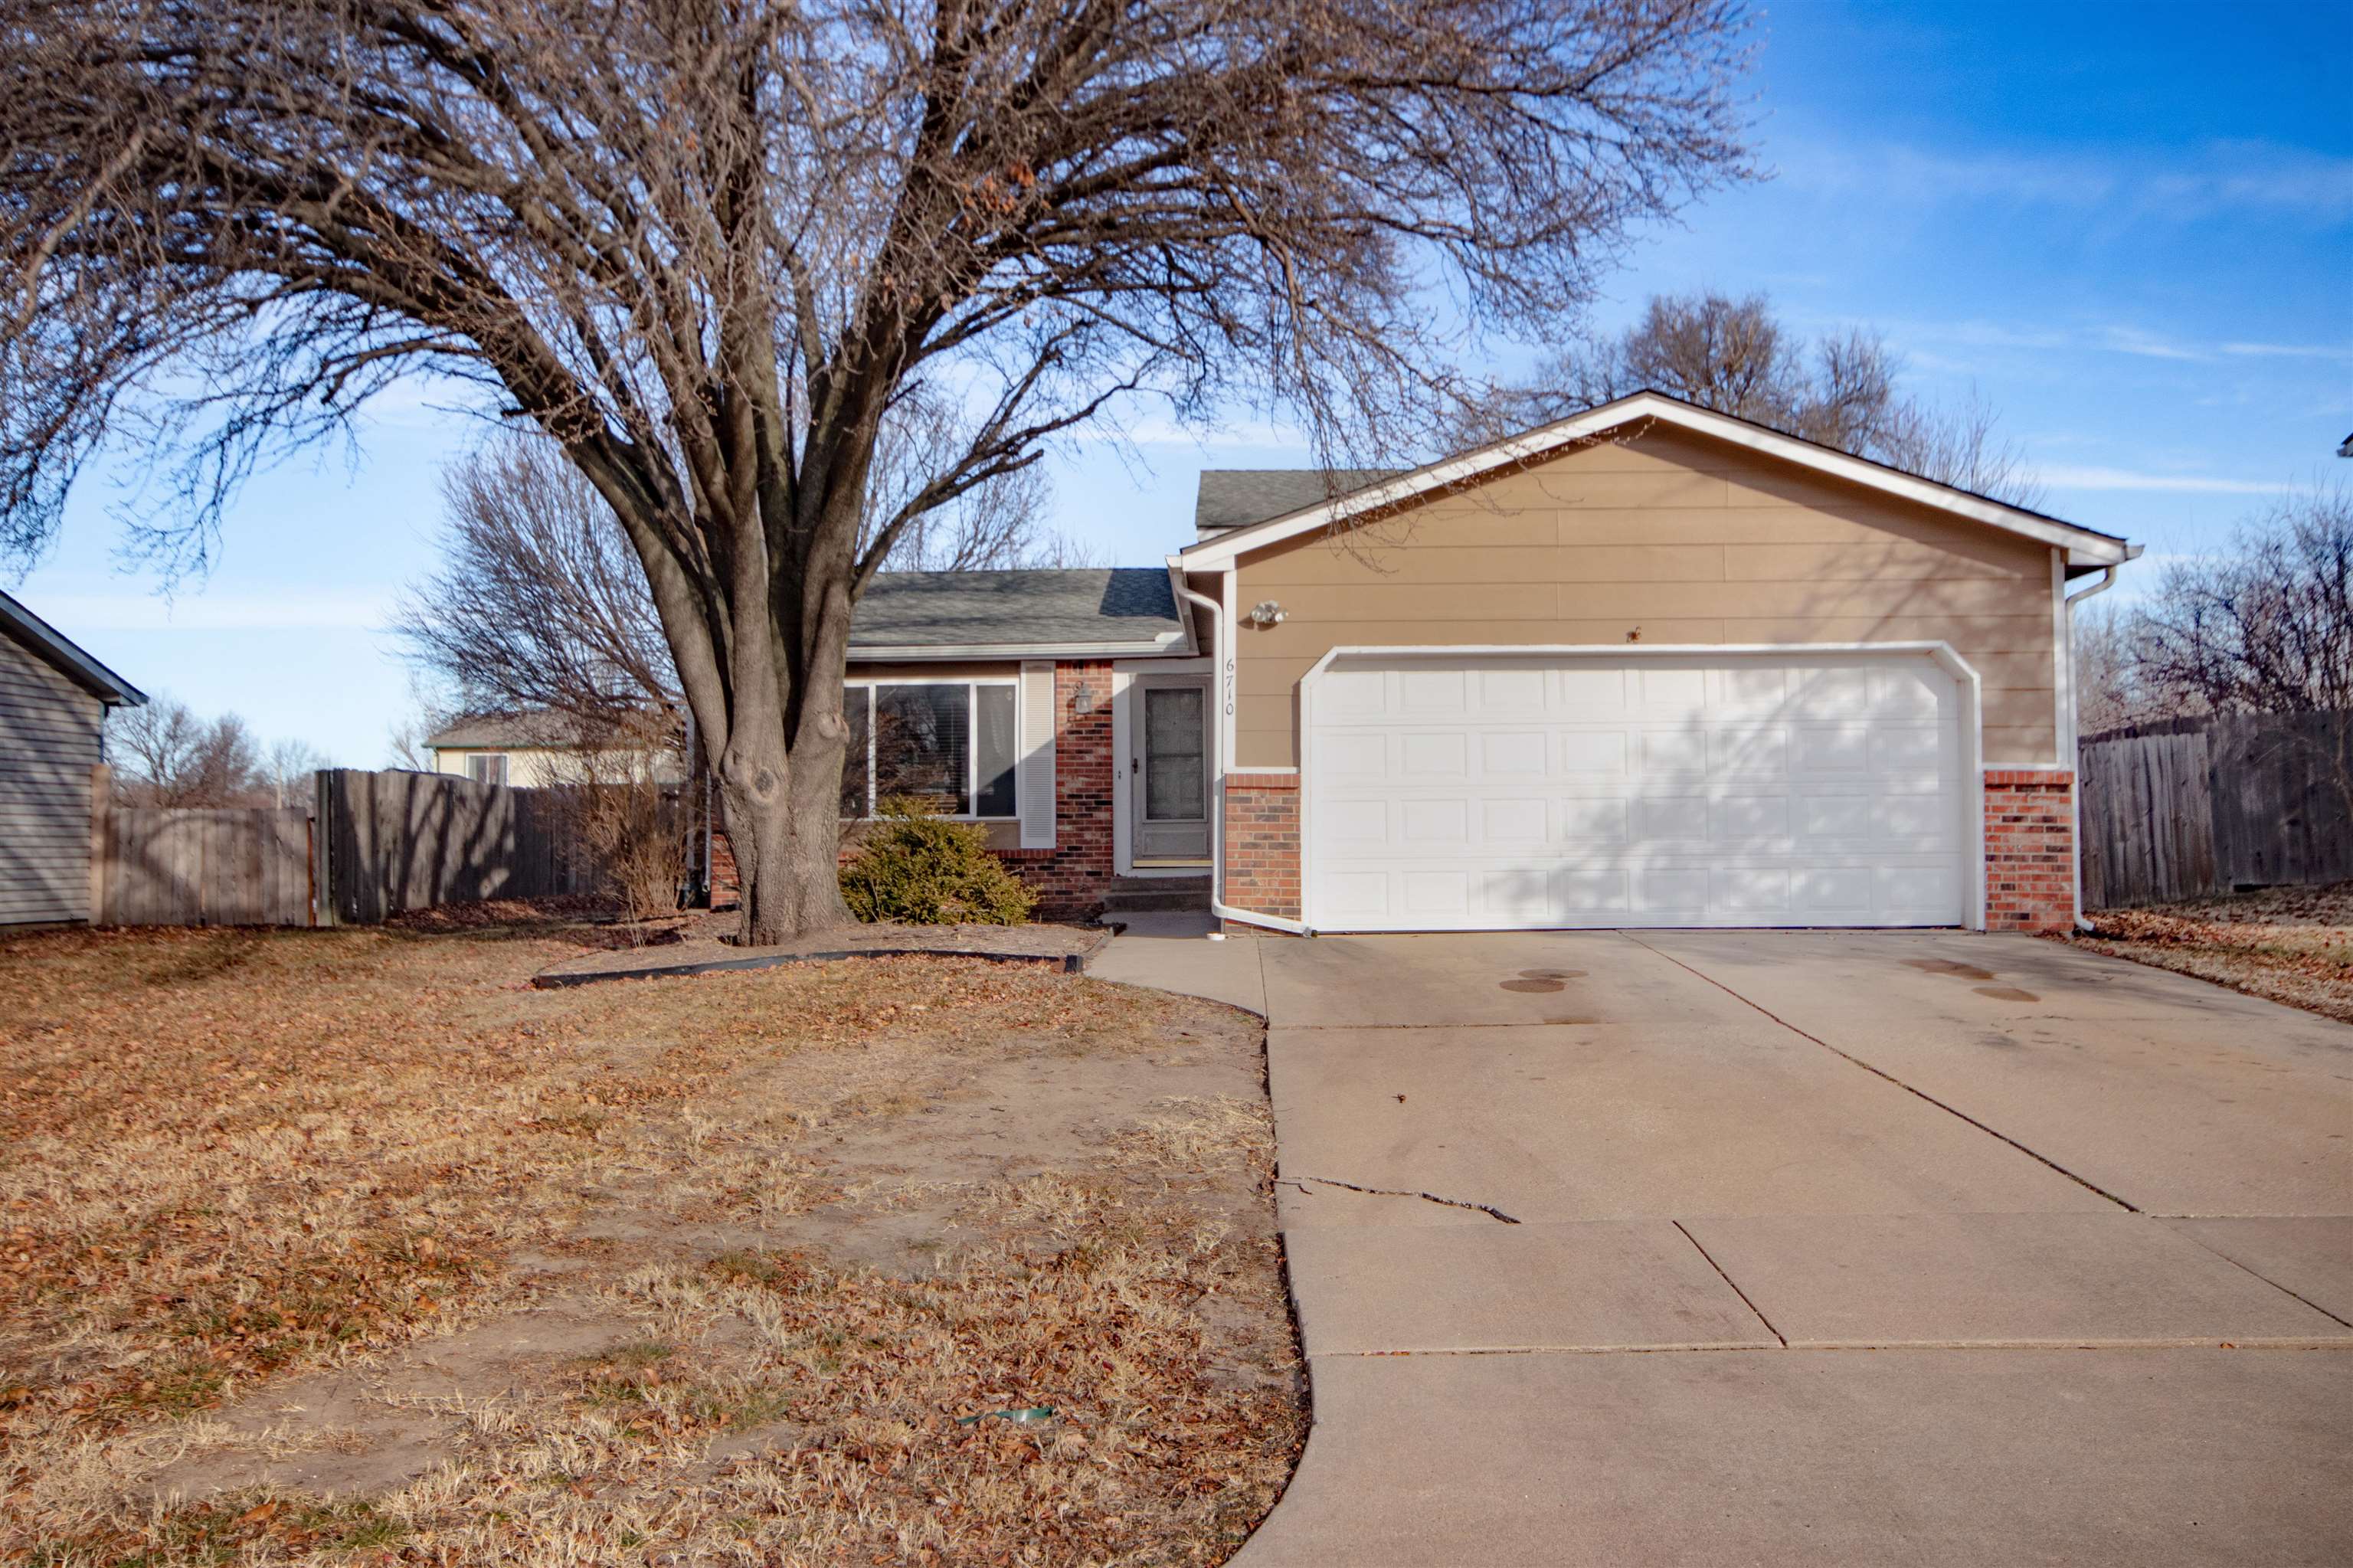 This 3 bedroom, 2 bathroom home sits in a quiet neighborhood in northeast Wichita. Here you are in c